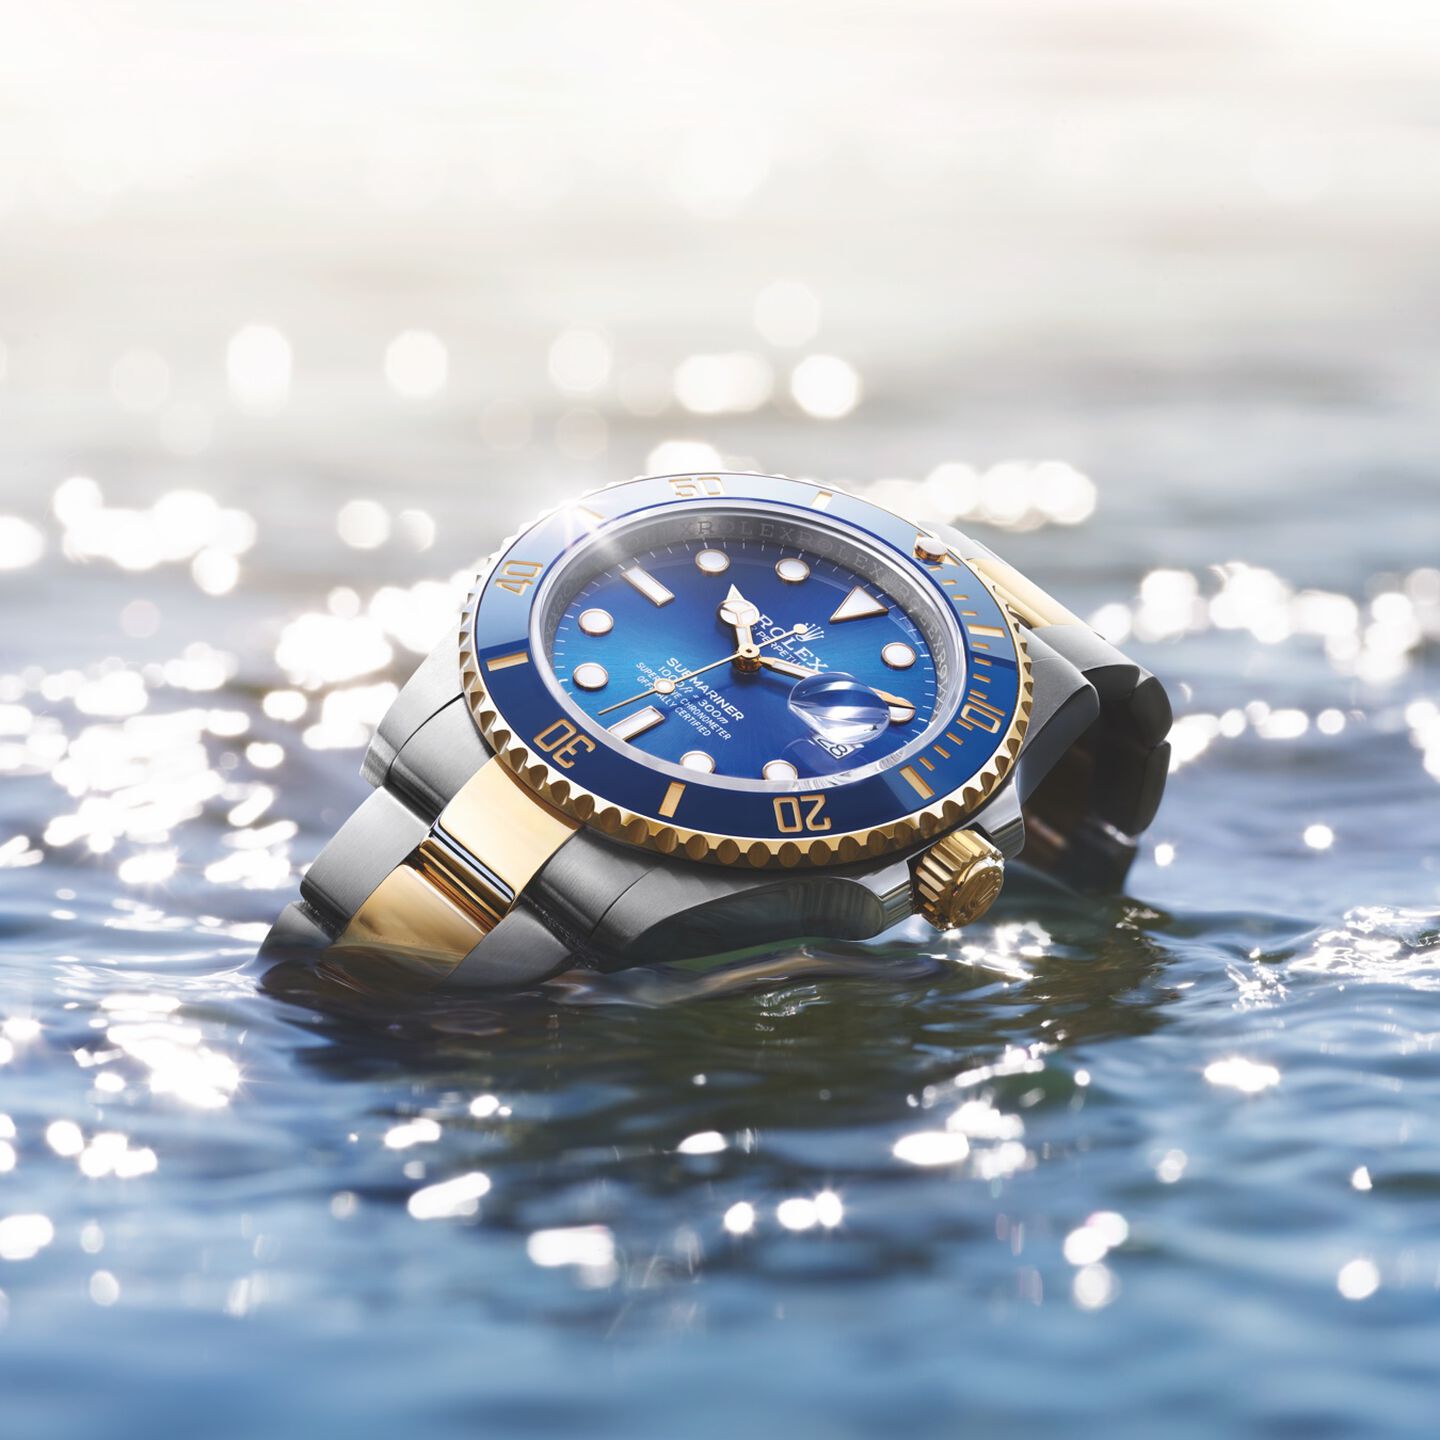 The reference among divers' watches